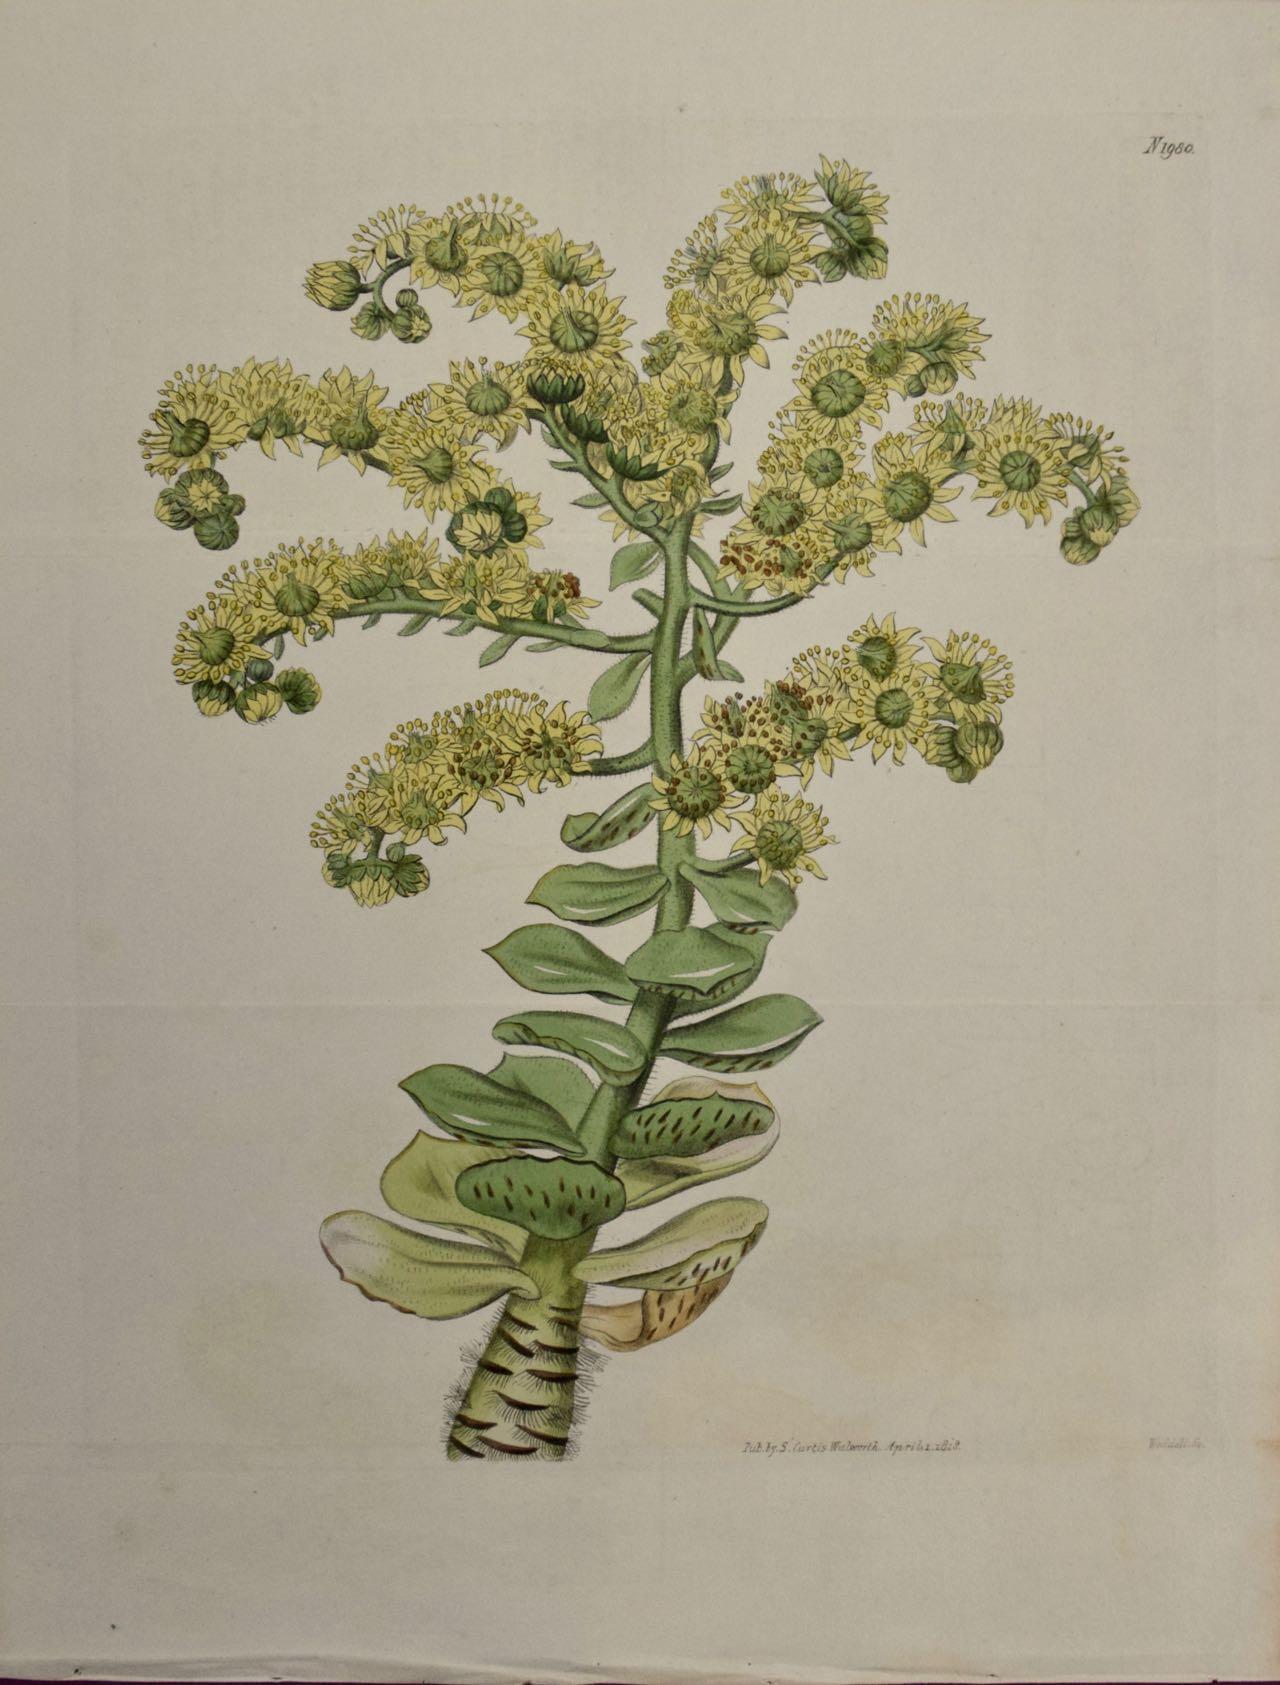 Flowering Houseleek Plant: A 19th C. Hand-colored Botanical Engraving by Curtis